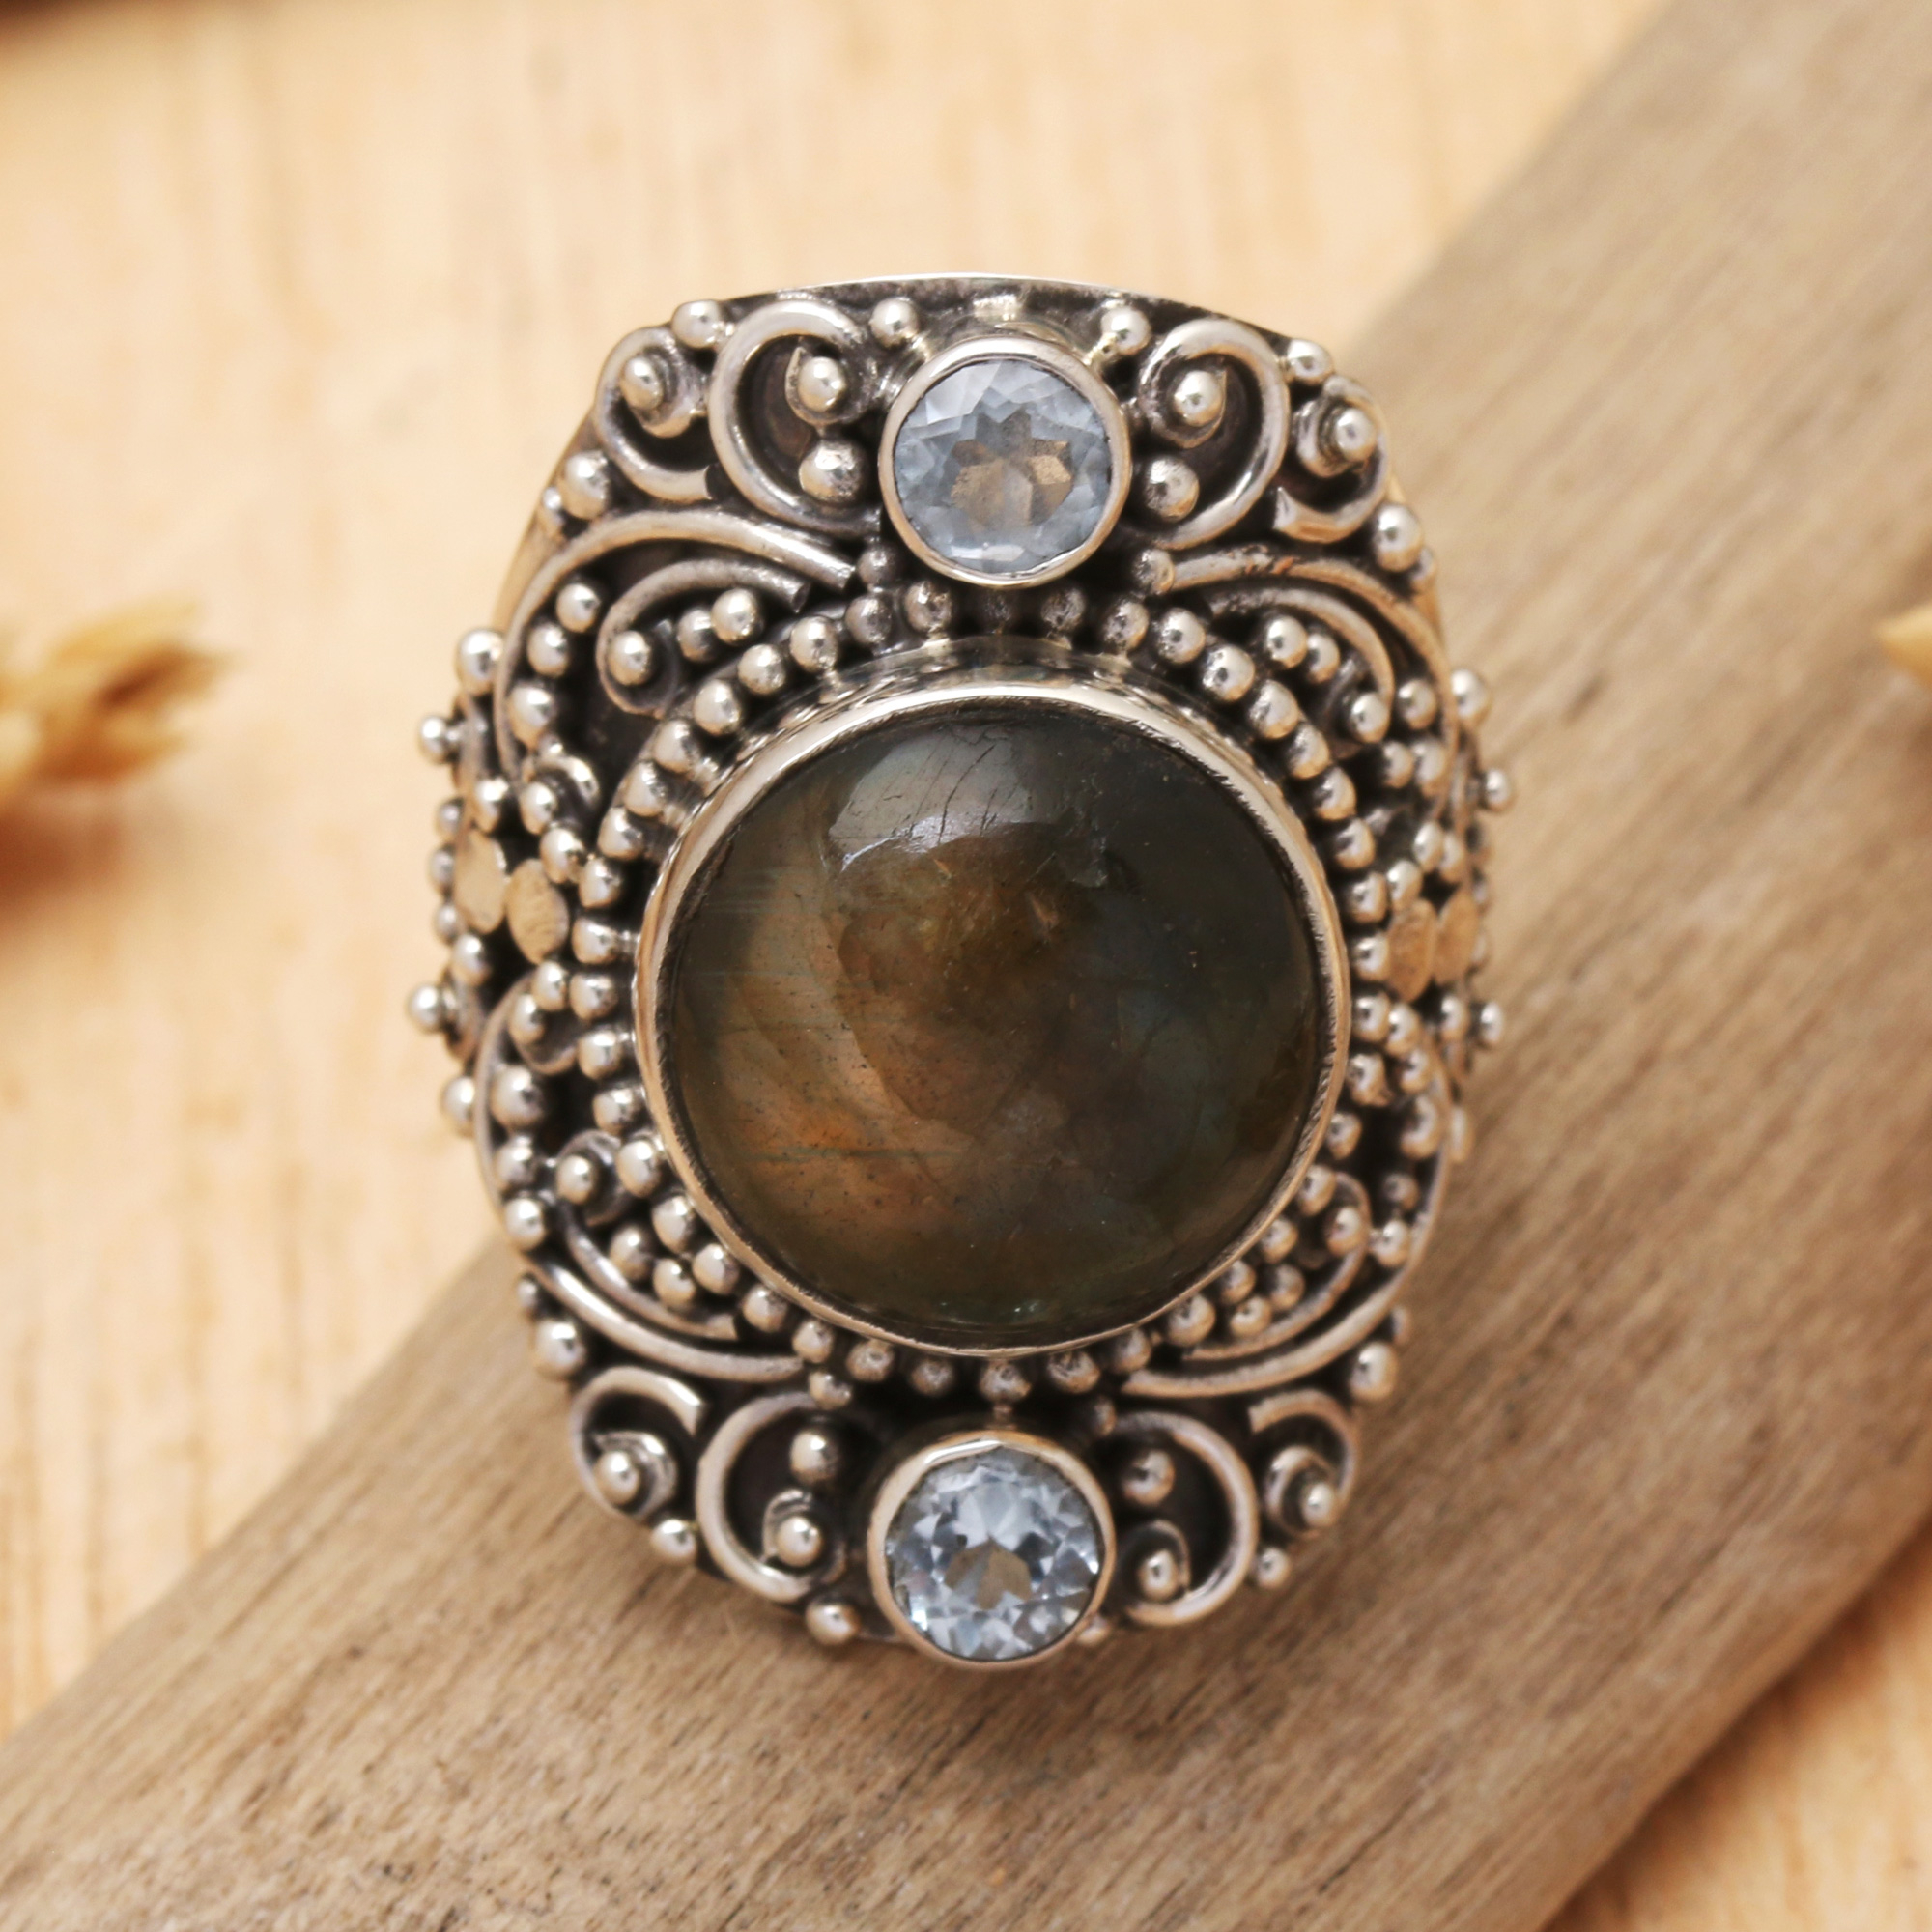 Labradorite and Blue Topaz Cocktail Ring from Bali - Beguiling Soul ...